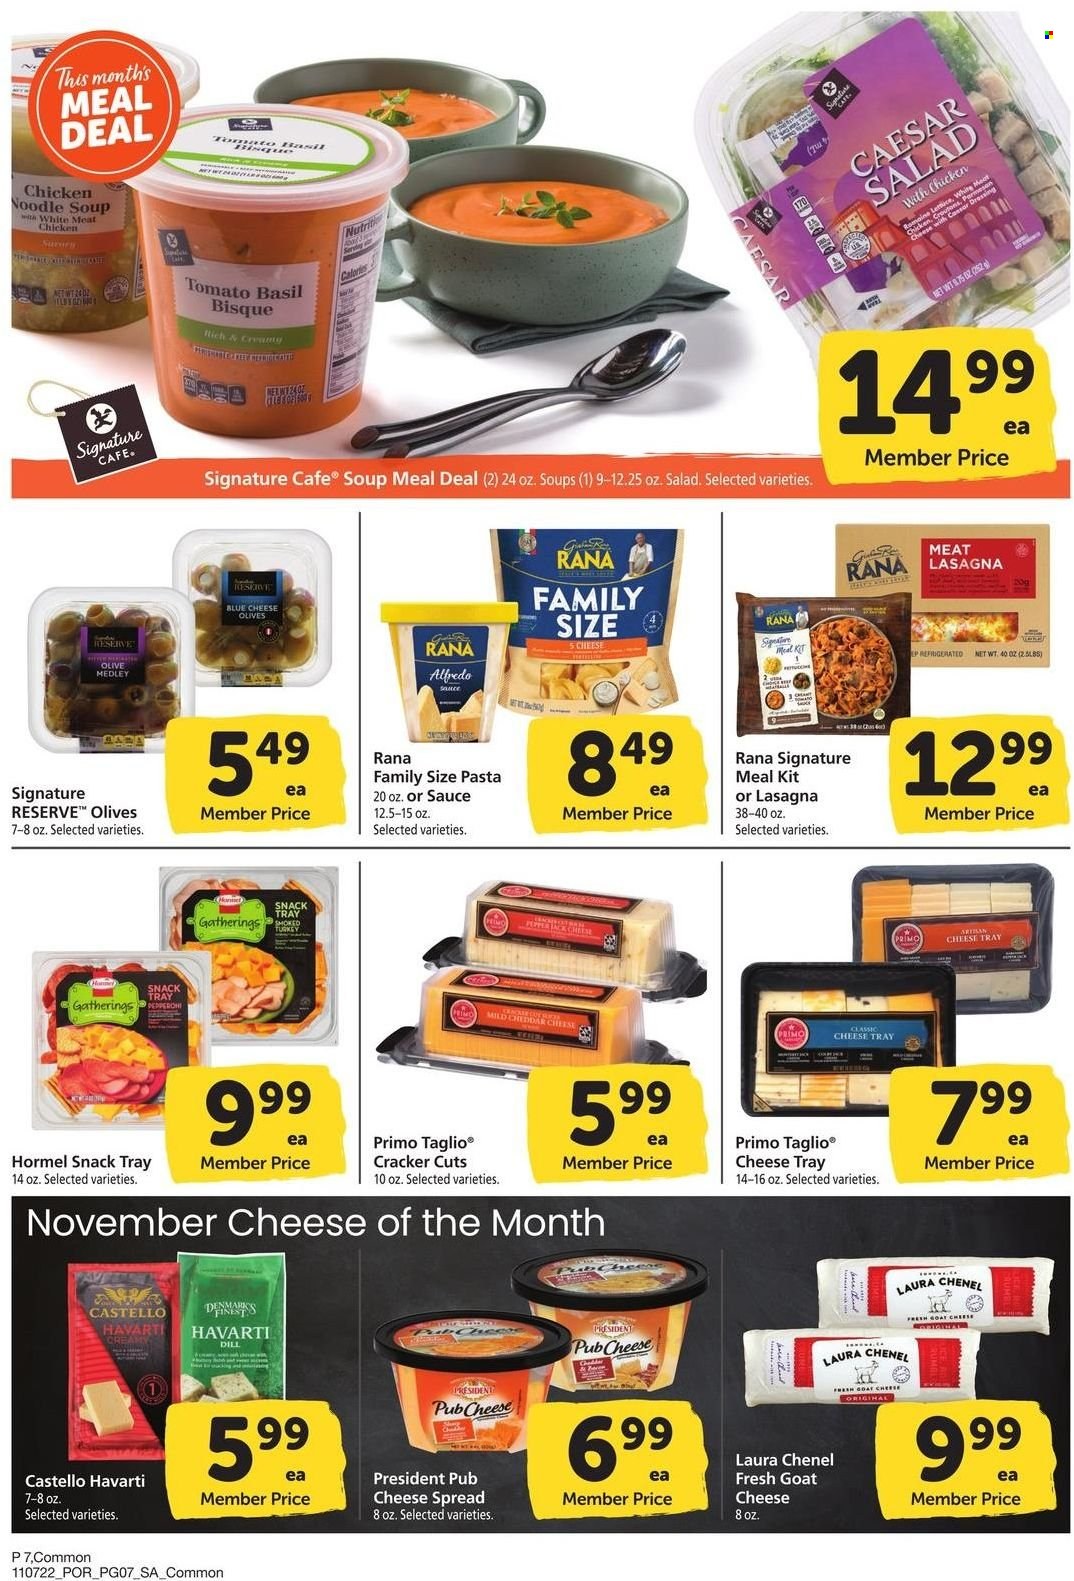 thumbnail - Safeway Flyer - 11/07/2022 - 12/04/2022 - Sales products - soup, pasta, noodles cup, noodles, Rana, Hormel, pepperoni, blue cheese, goat cheese, mild cheddar, Havarti, cheddar, pub cheese, Président, snack, crackers, olives, dill. Page 7.